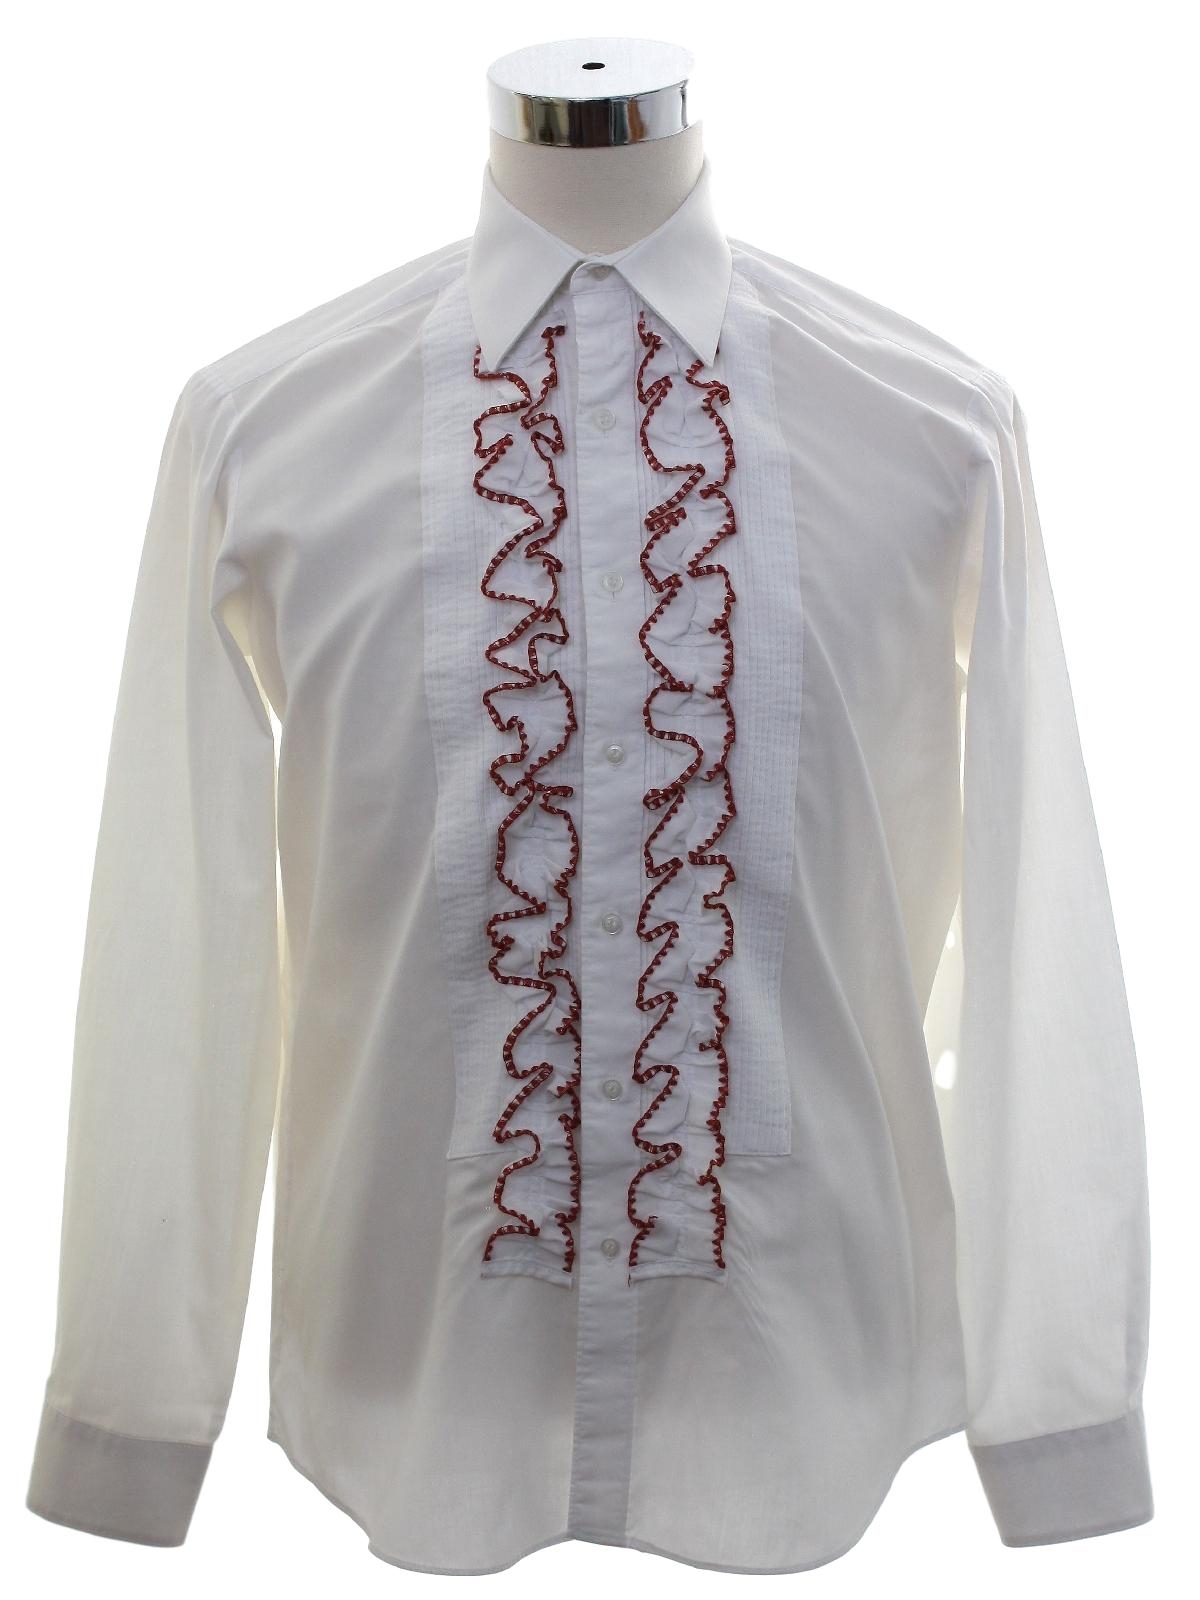 70's Vintage Shirt: Late 70s -L and M Fashions- Mens white background